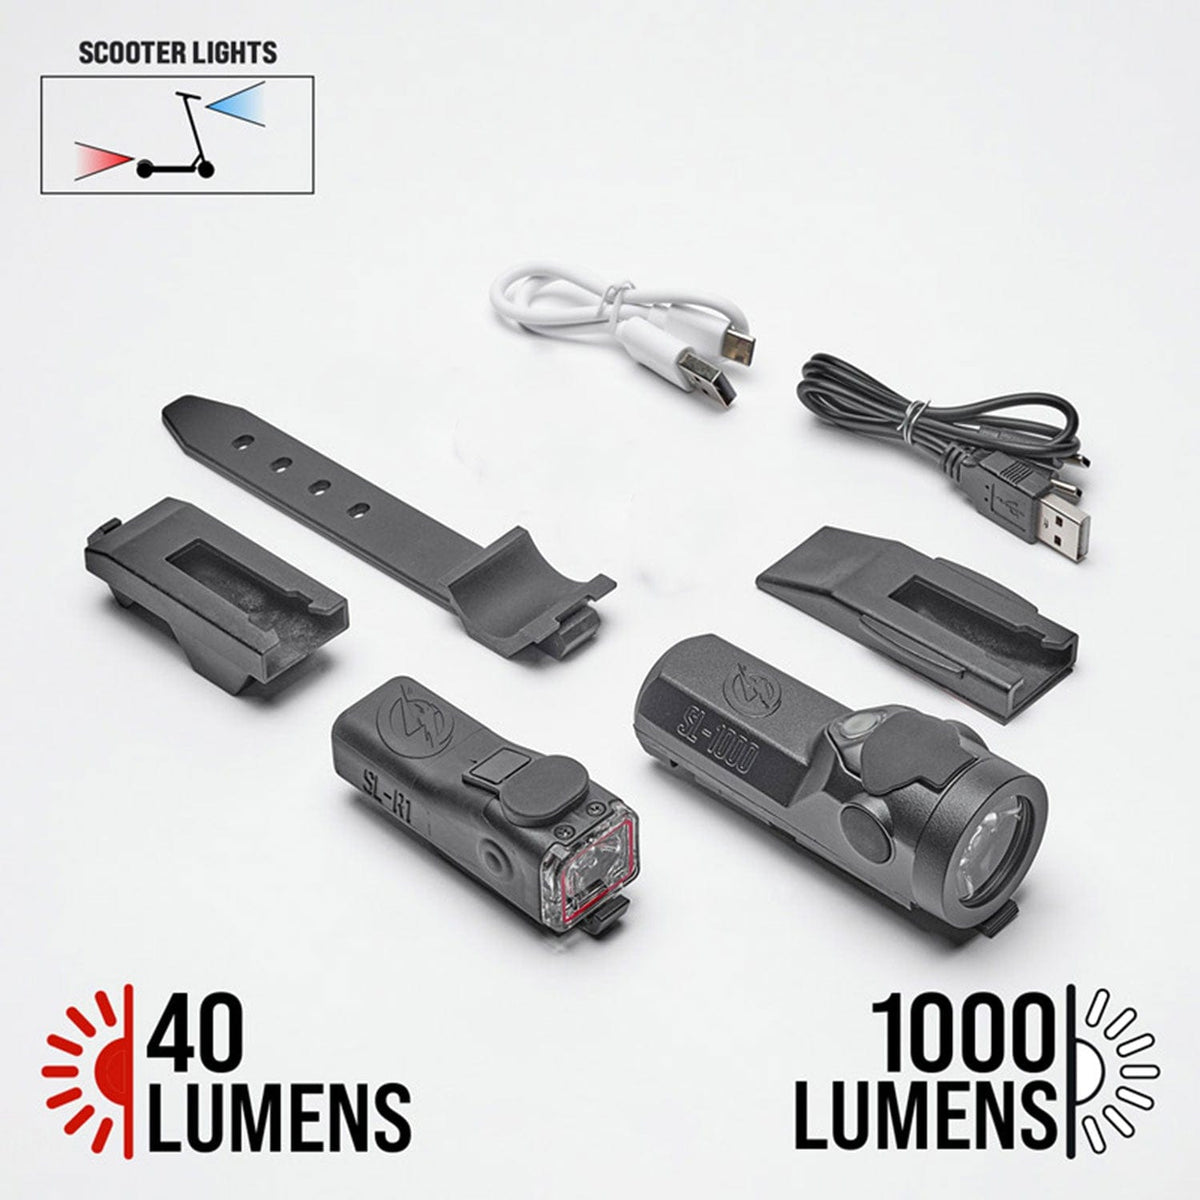 SL-1000/R1 Scooter Combo Pack